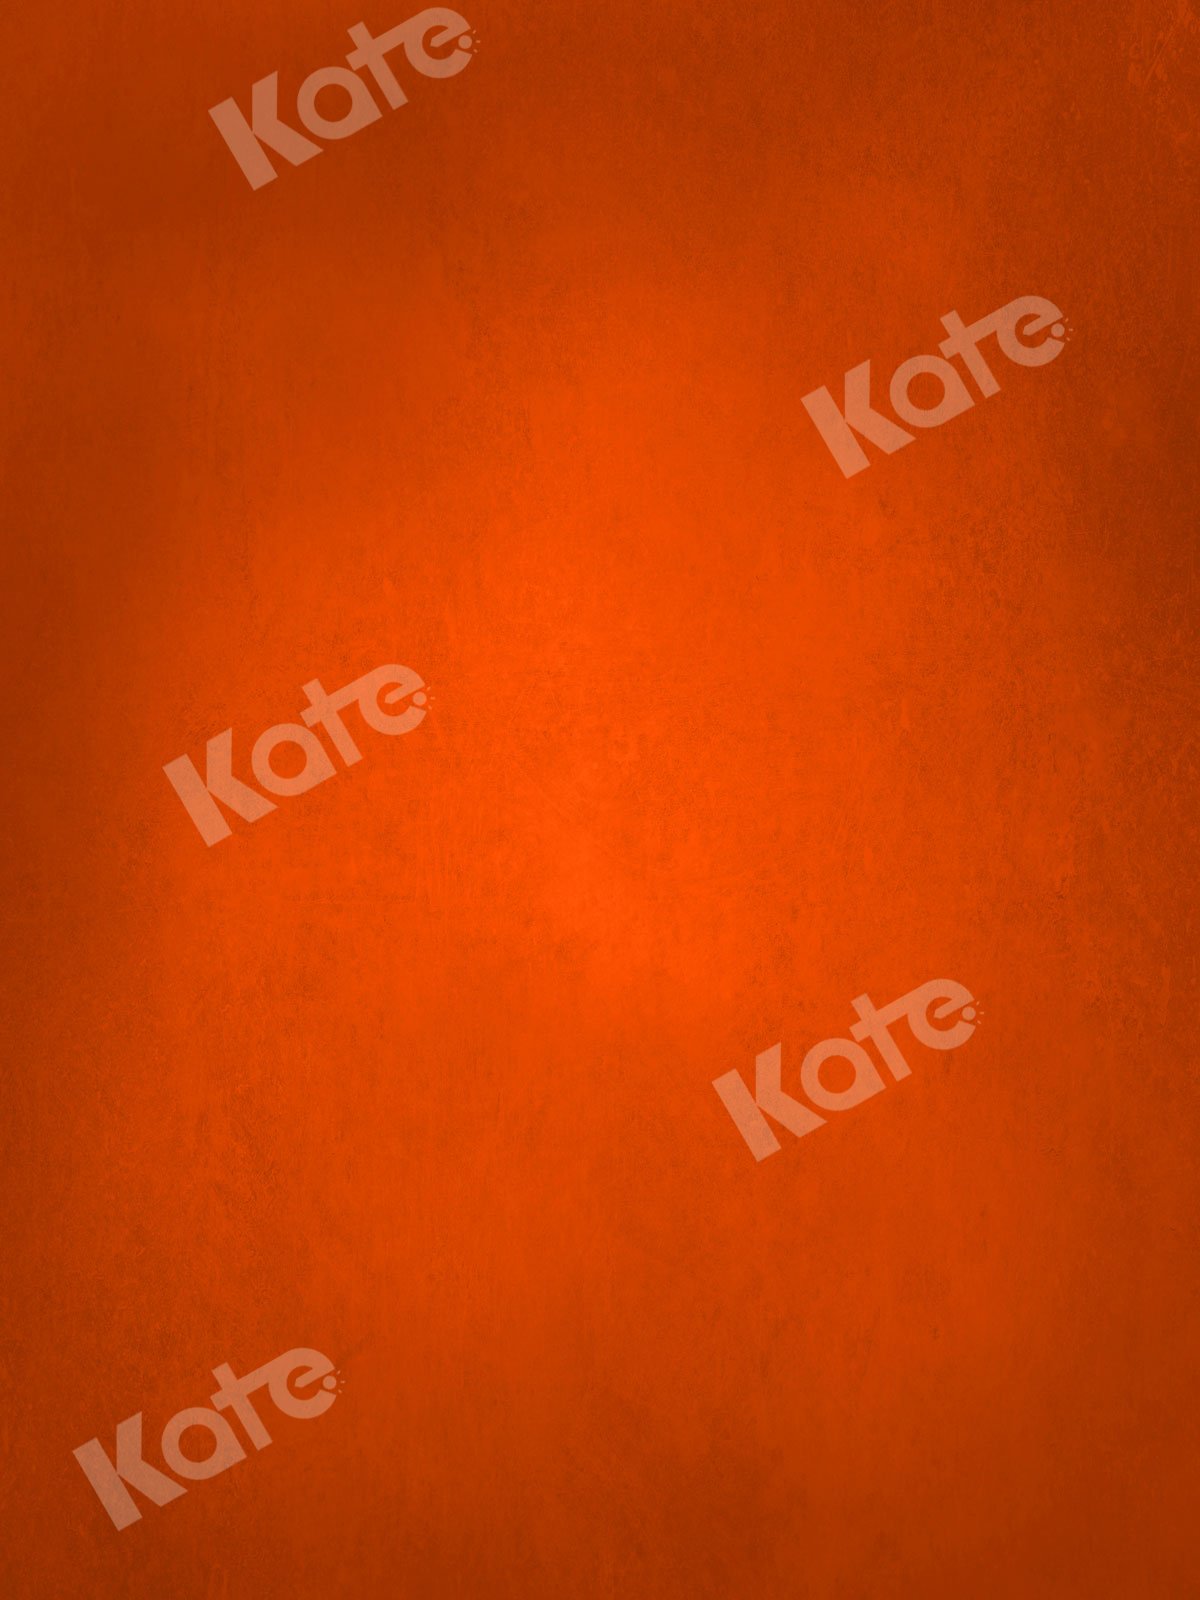 Kate Abstract Orange Backdrop for Photography